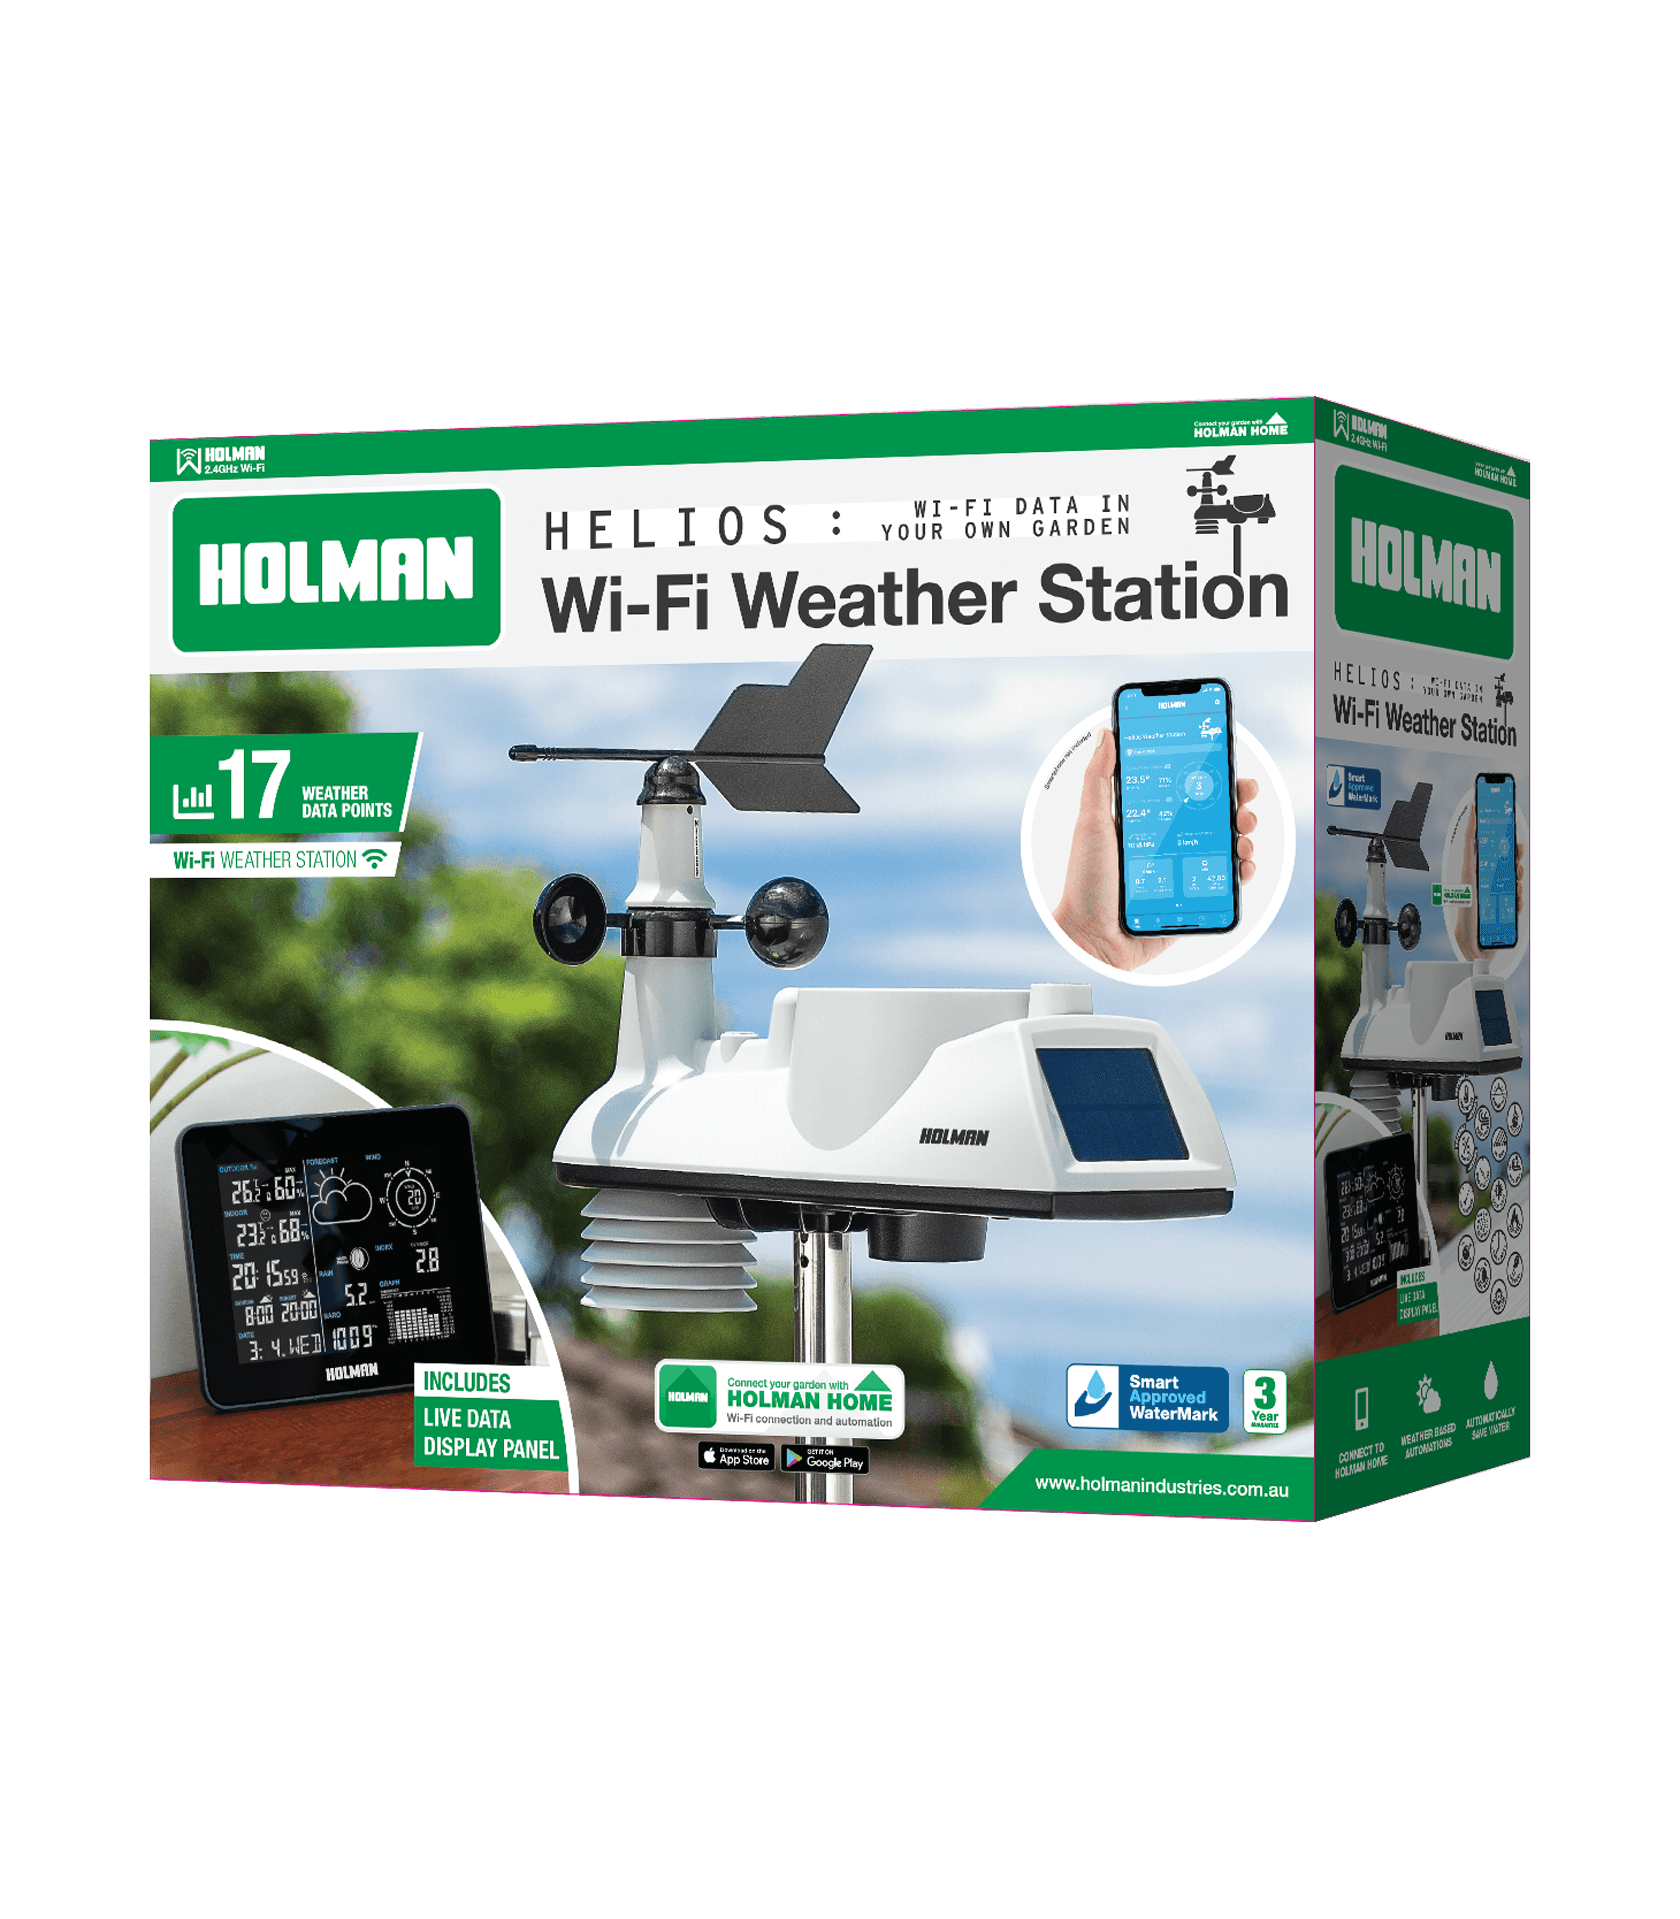 Helios Wi-Fi Weather Station Packaging